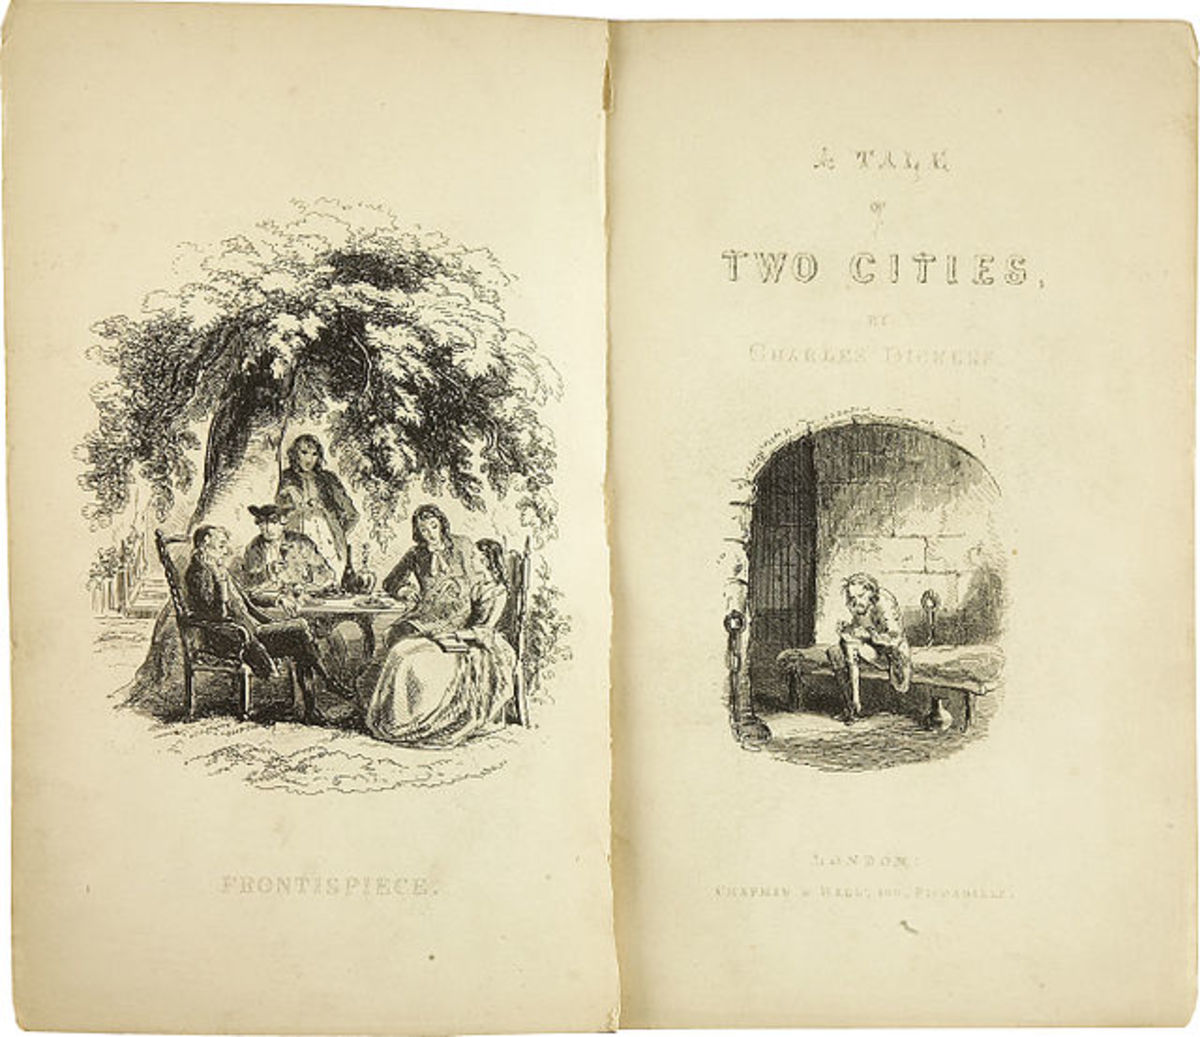 A Tale of Two Cities. With Illustrations by H. K. Browne. London: Chapman and Hall, 1859. First edition.